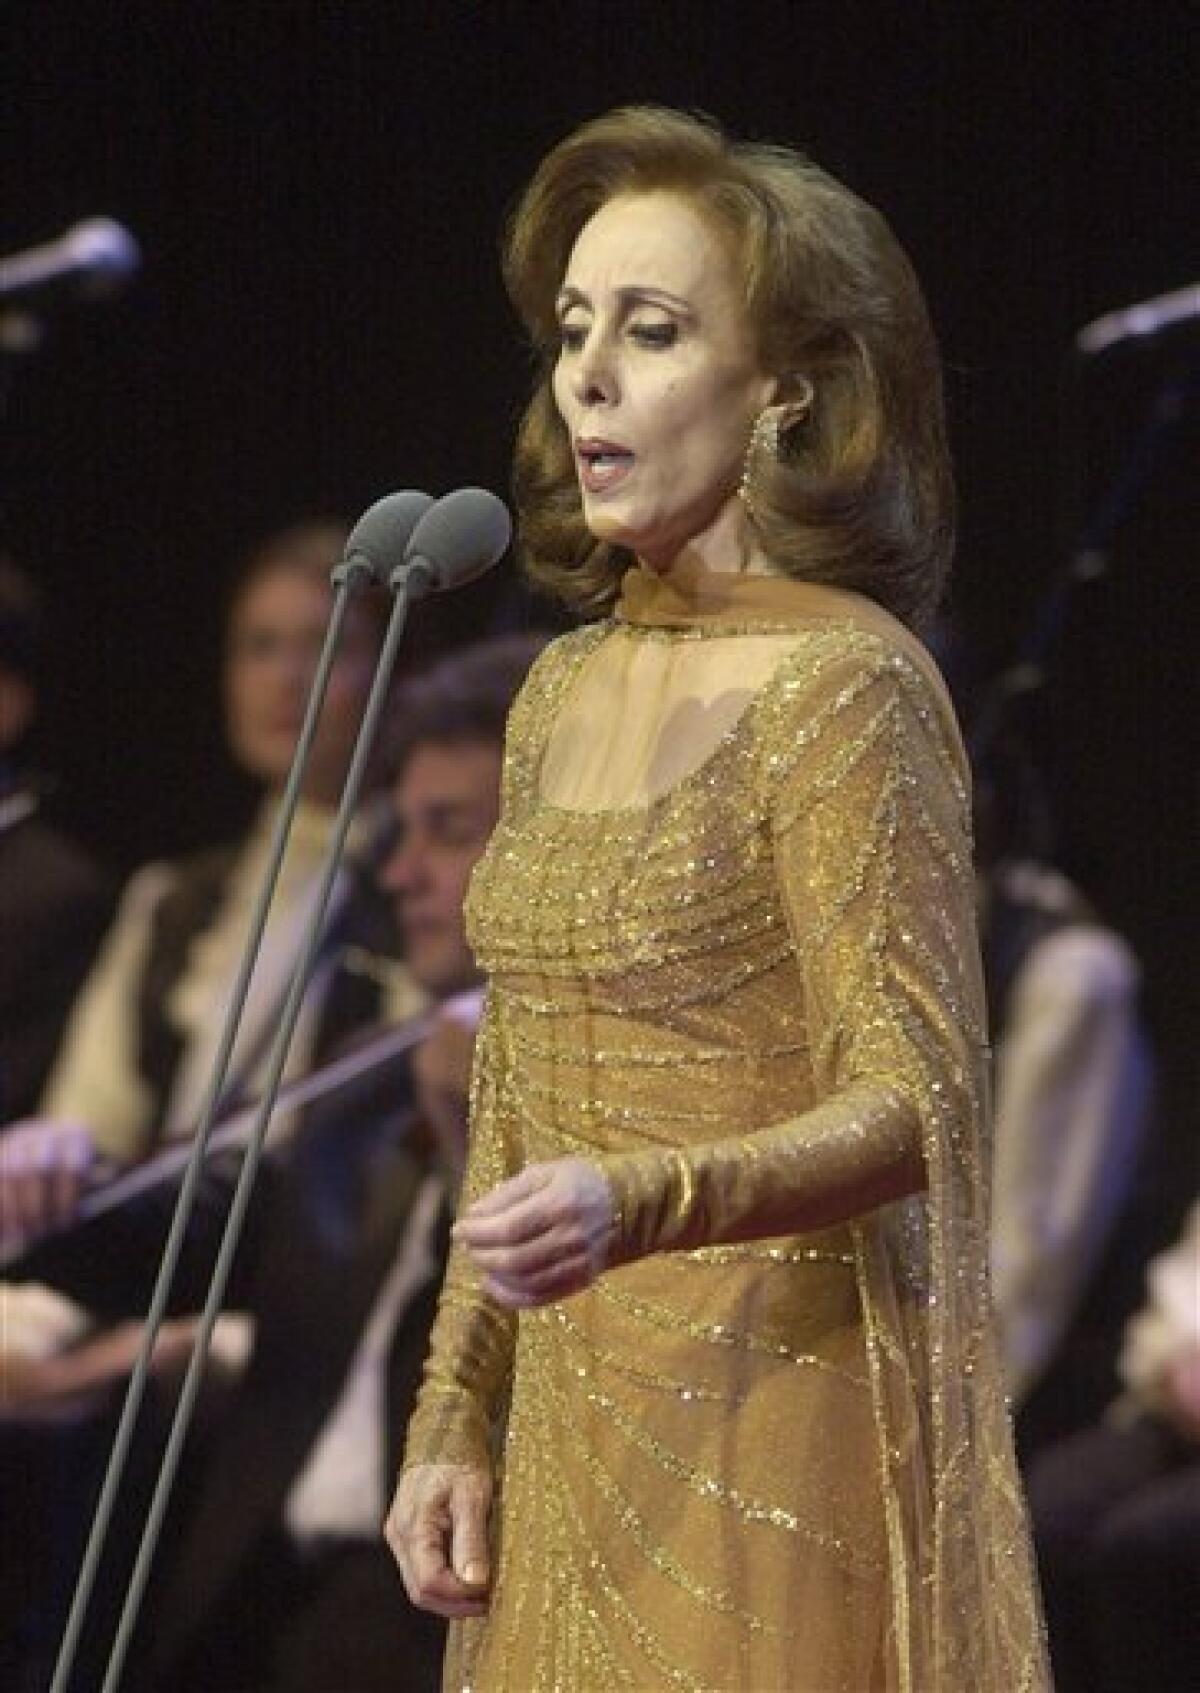 In this photo taken on Aug. 9, 2002, Lebanon's diva Fairouz performs during a concert in Beiteddine, in the central Chouf mountains southeast of Beirut, Lebanon. For four decades, Lebanese singer Fairouz has performed on the world's most prestigious stages, moving audiences to tears with songs of freedom, justice and love throughout 15-years of civil war. Now, a bitter family dispute over inheritance, song royalties and intellectual property rights is threatening to silence Lebanon's most beloved diva, who is now 75-years old, and fans are outraged, and marching in the streets to ask her to keep singing. (AP Photo/Hussein Malla)